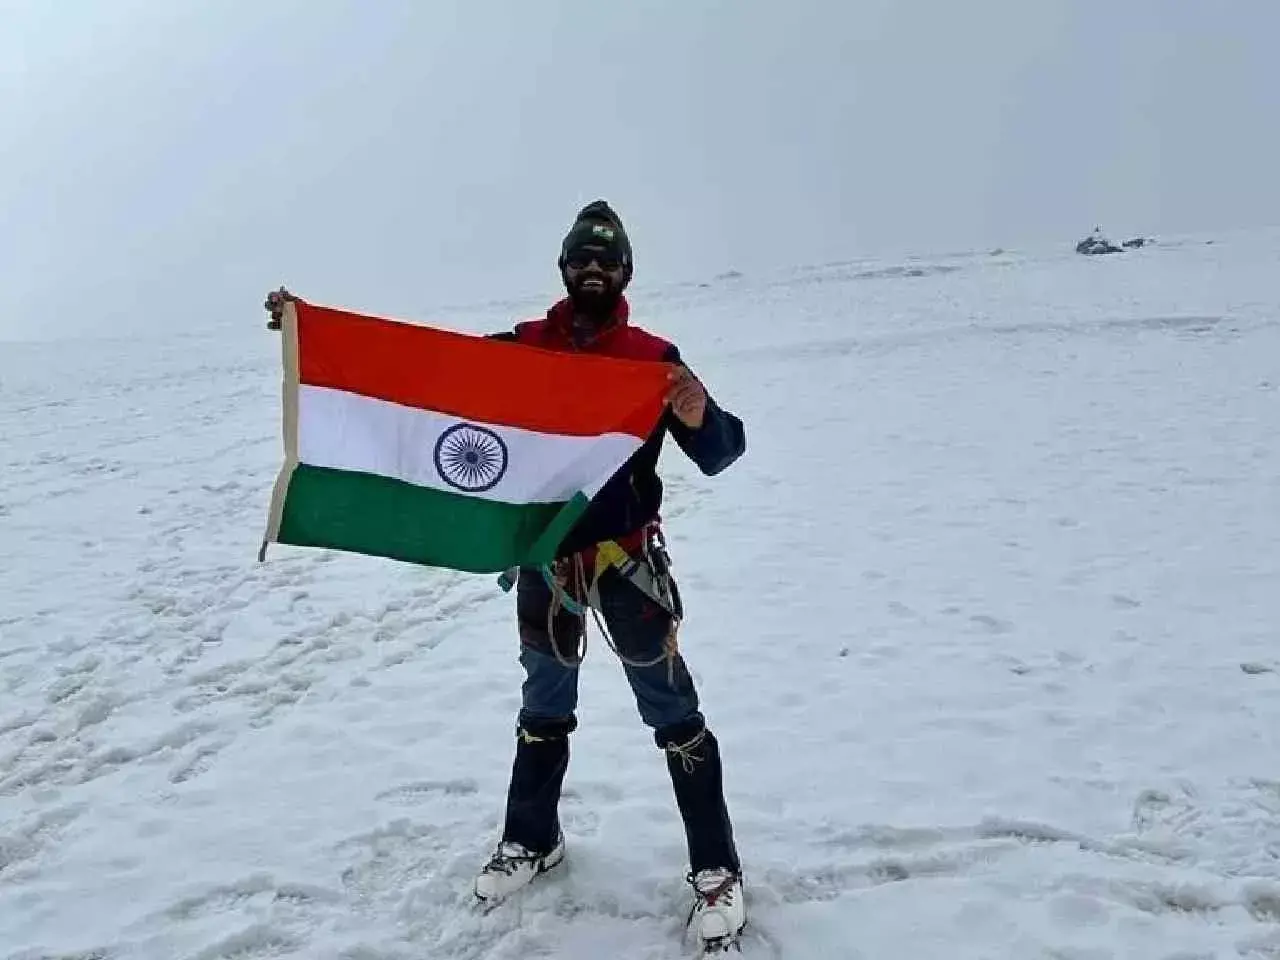 Missing Indian climber Anurag Maloo found alive in critical condition on Nepals Mount Annapurna